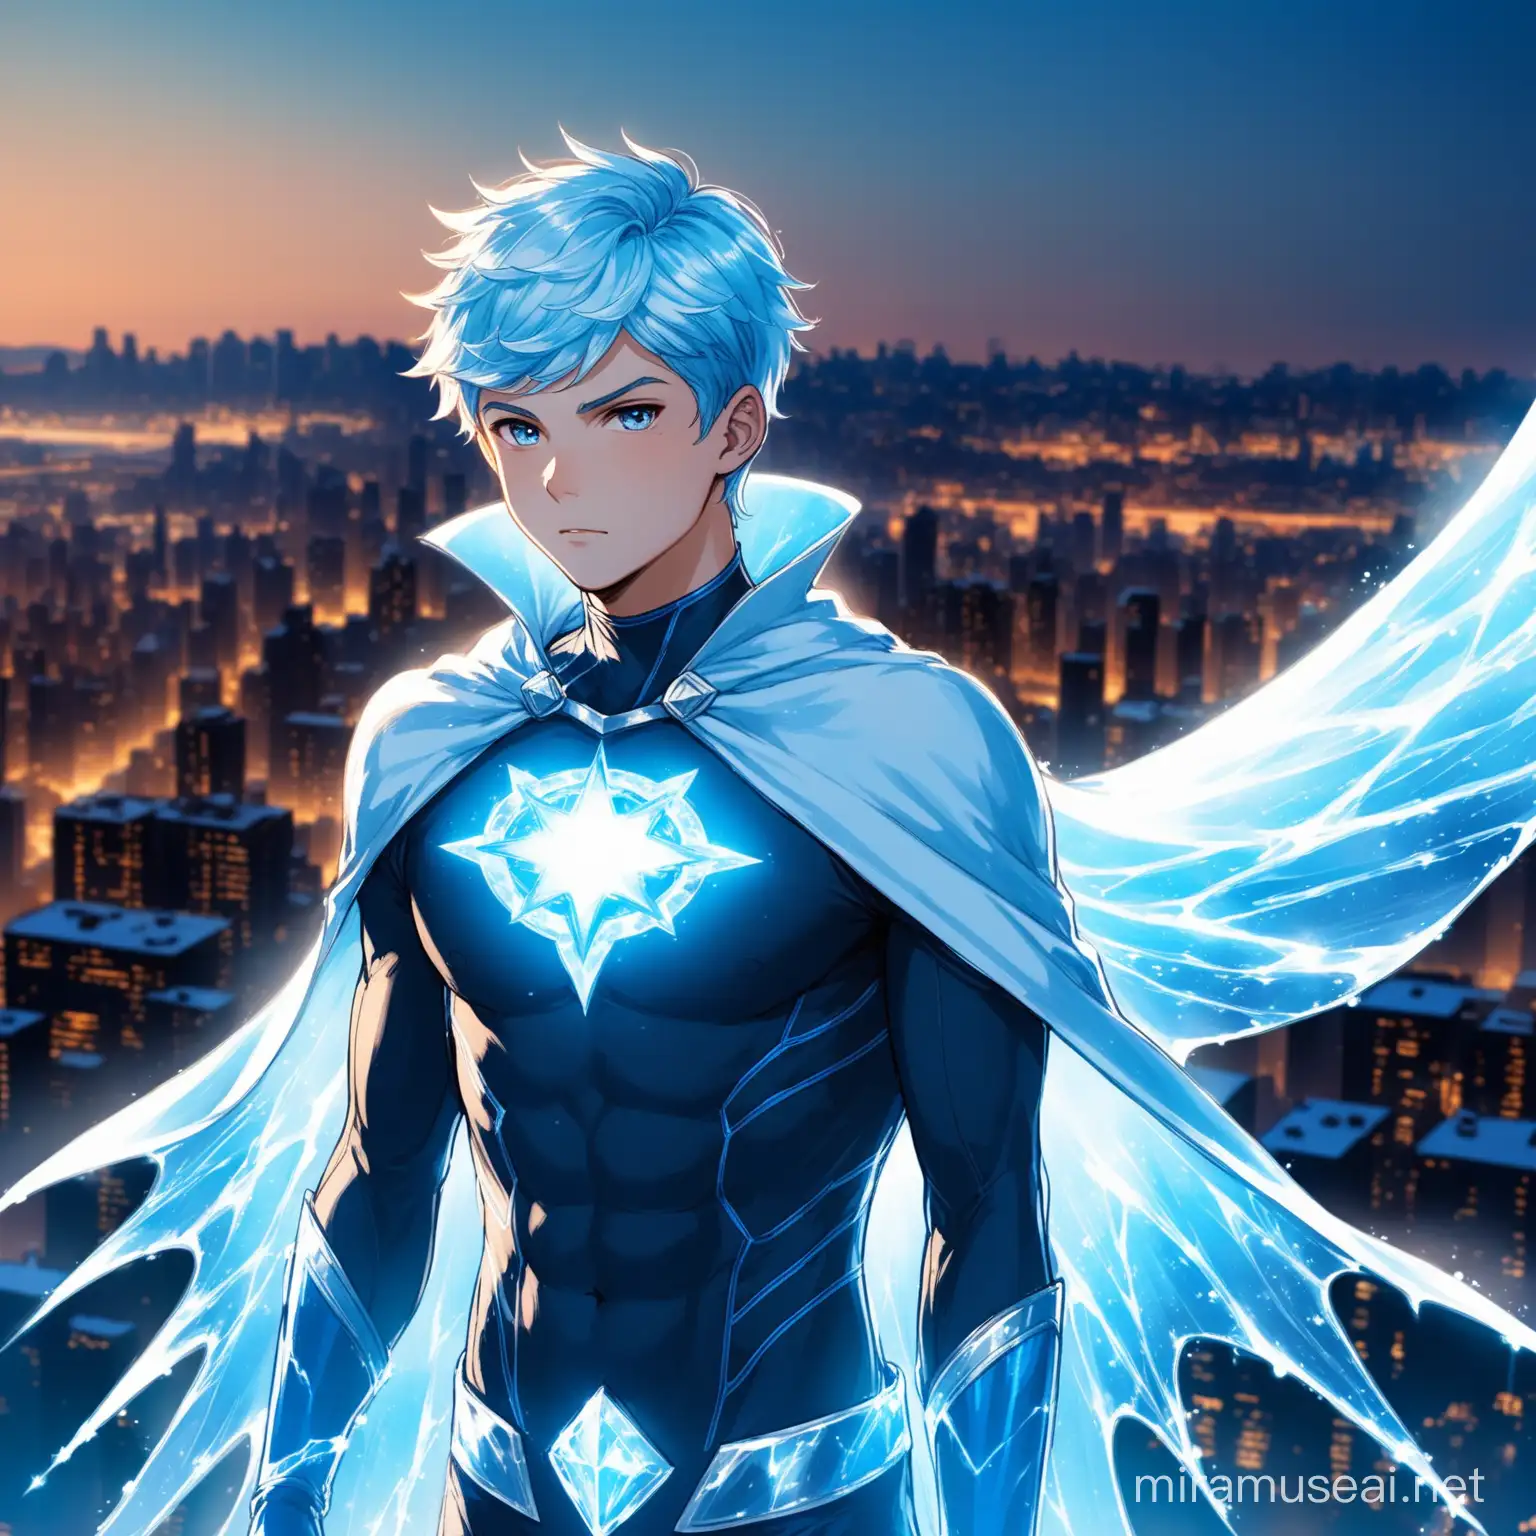 Dynamic Male Twink Superhero with Ice Powers and Dramatic Cape in Cityscape